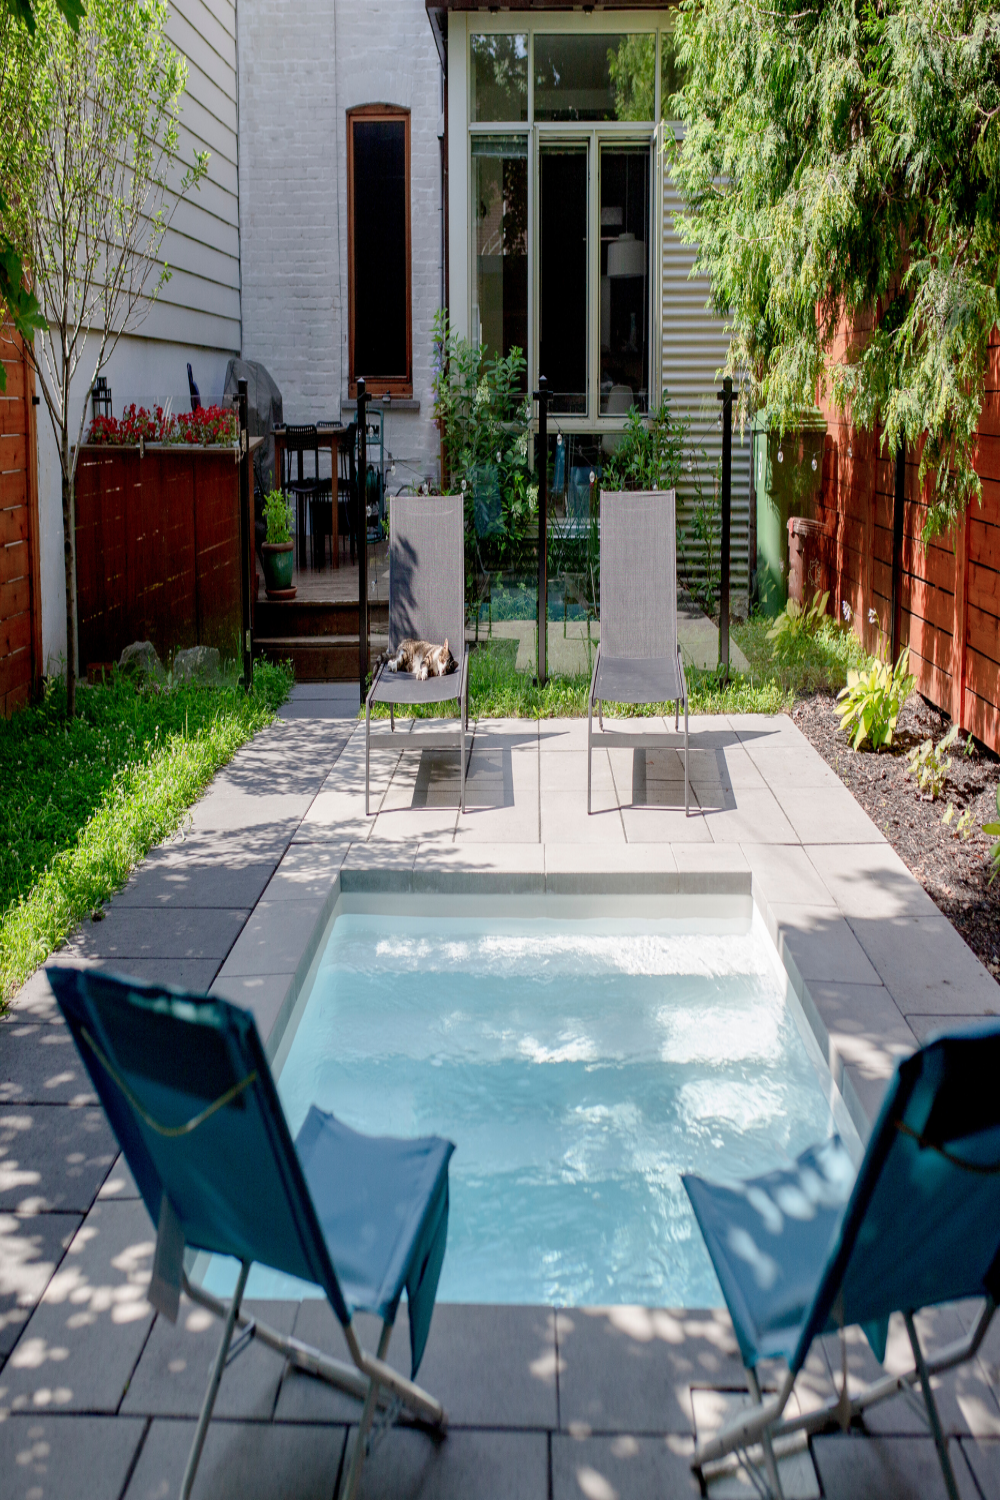 Landscaping Ideas & Solutions for Small Spaces